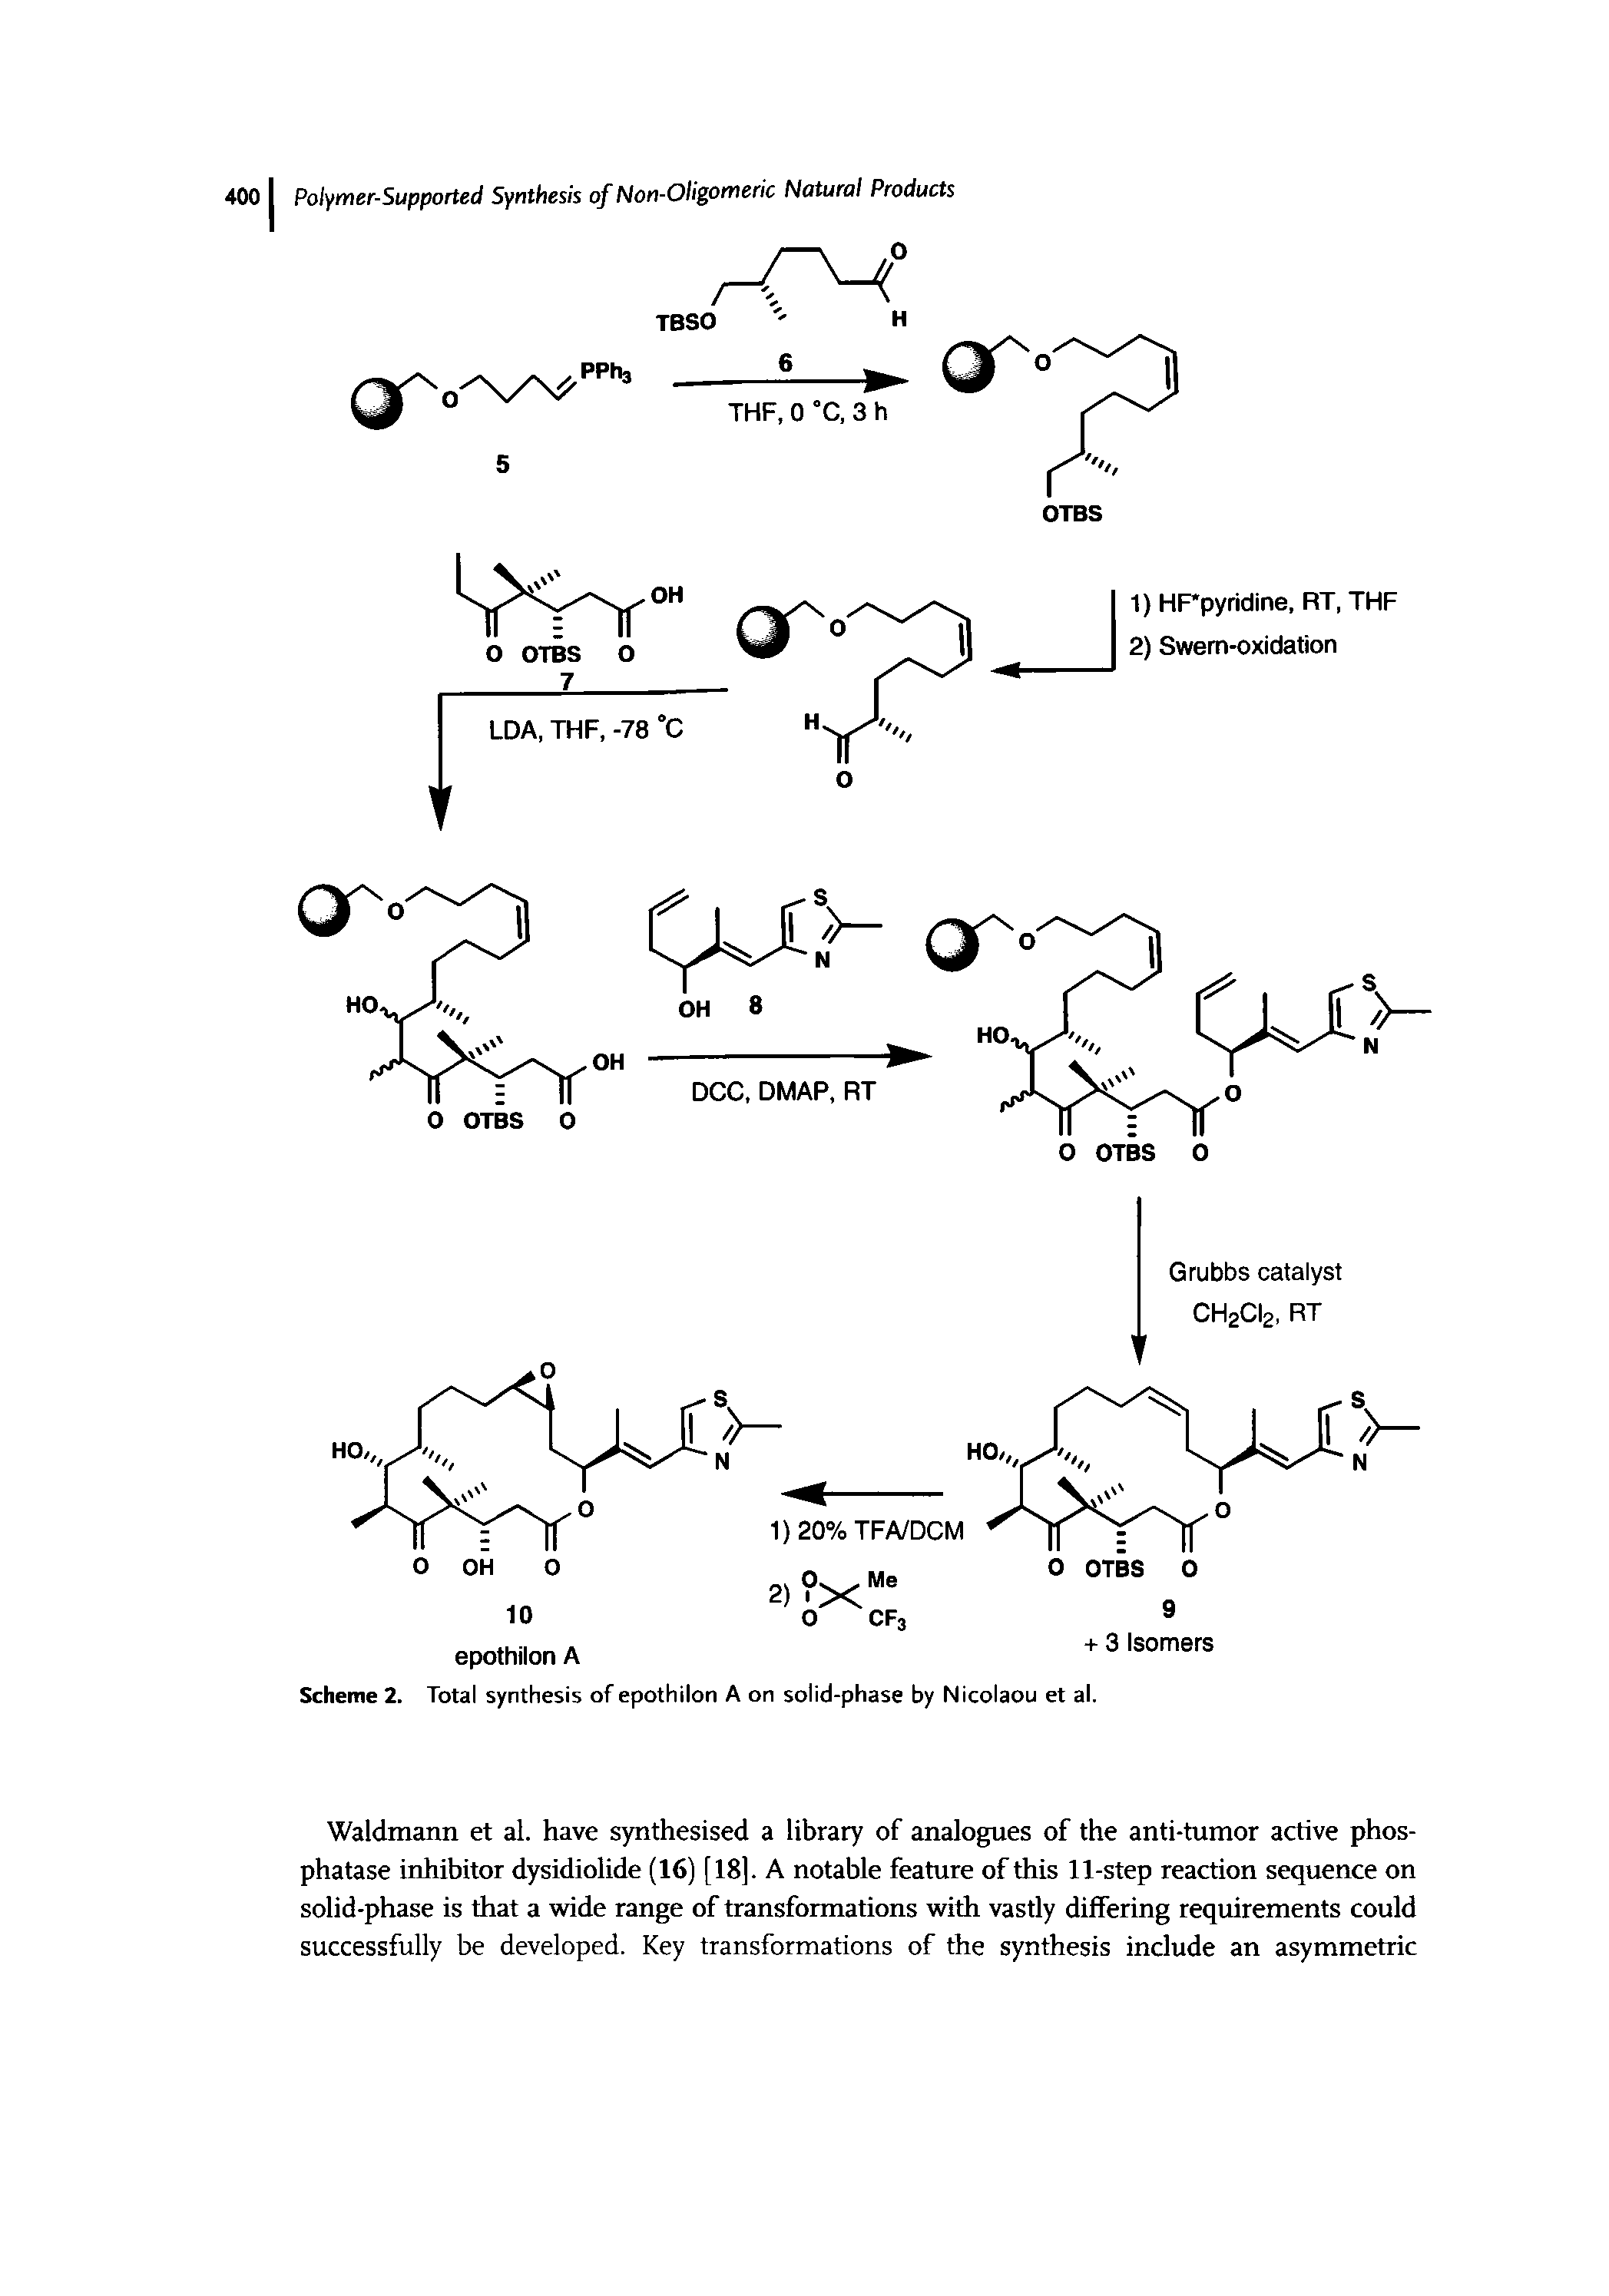 Scheme 2. Total synthesis of epothilon A on solid-phase by Nicolaou et al.